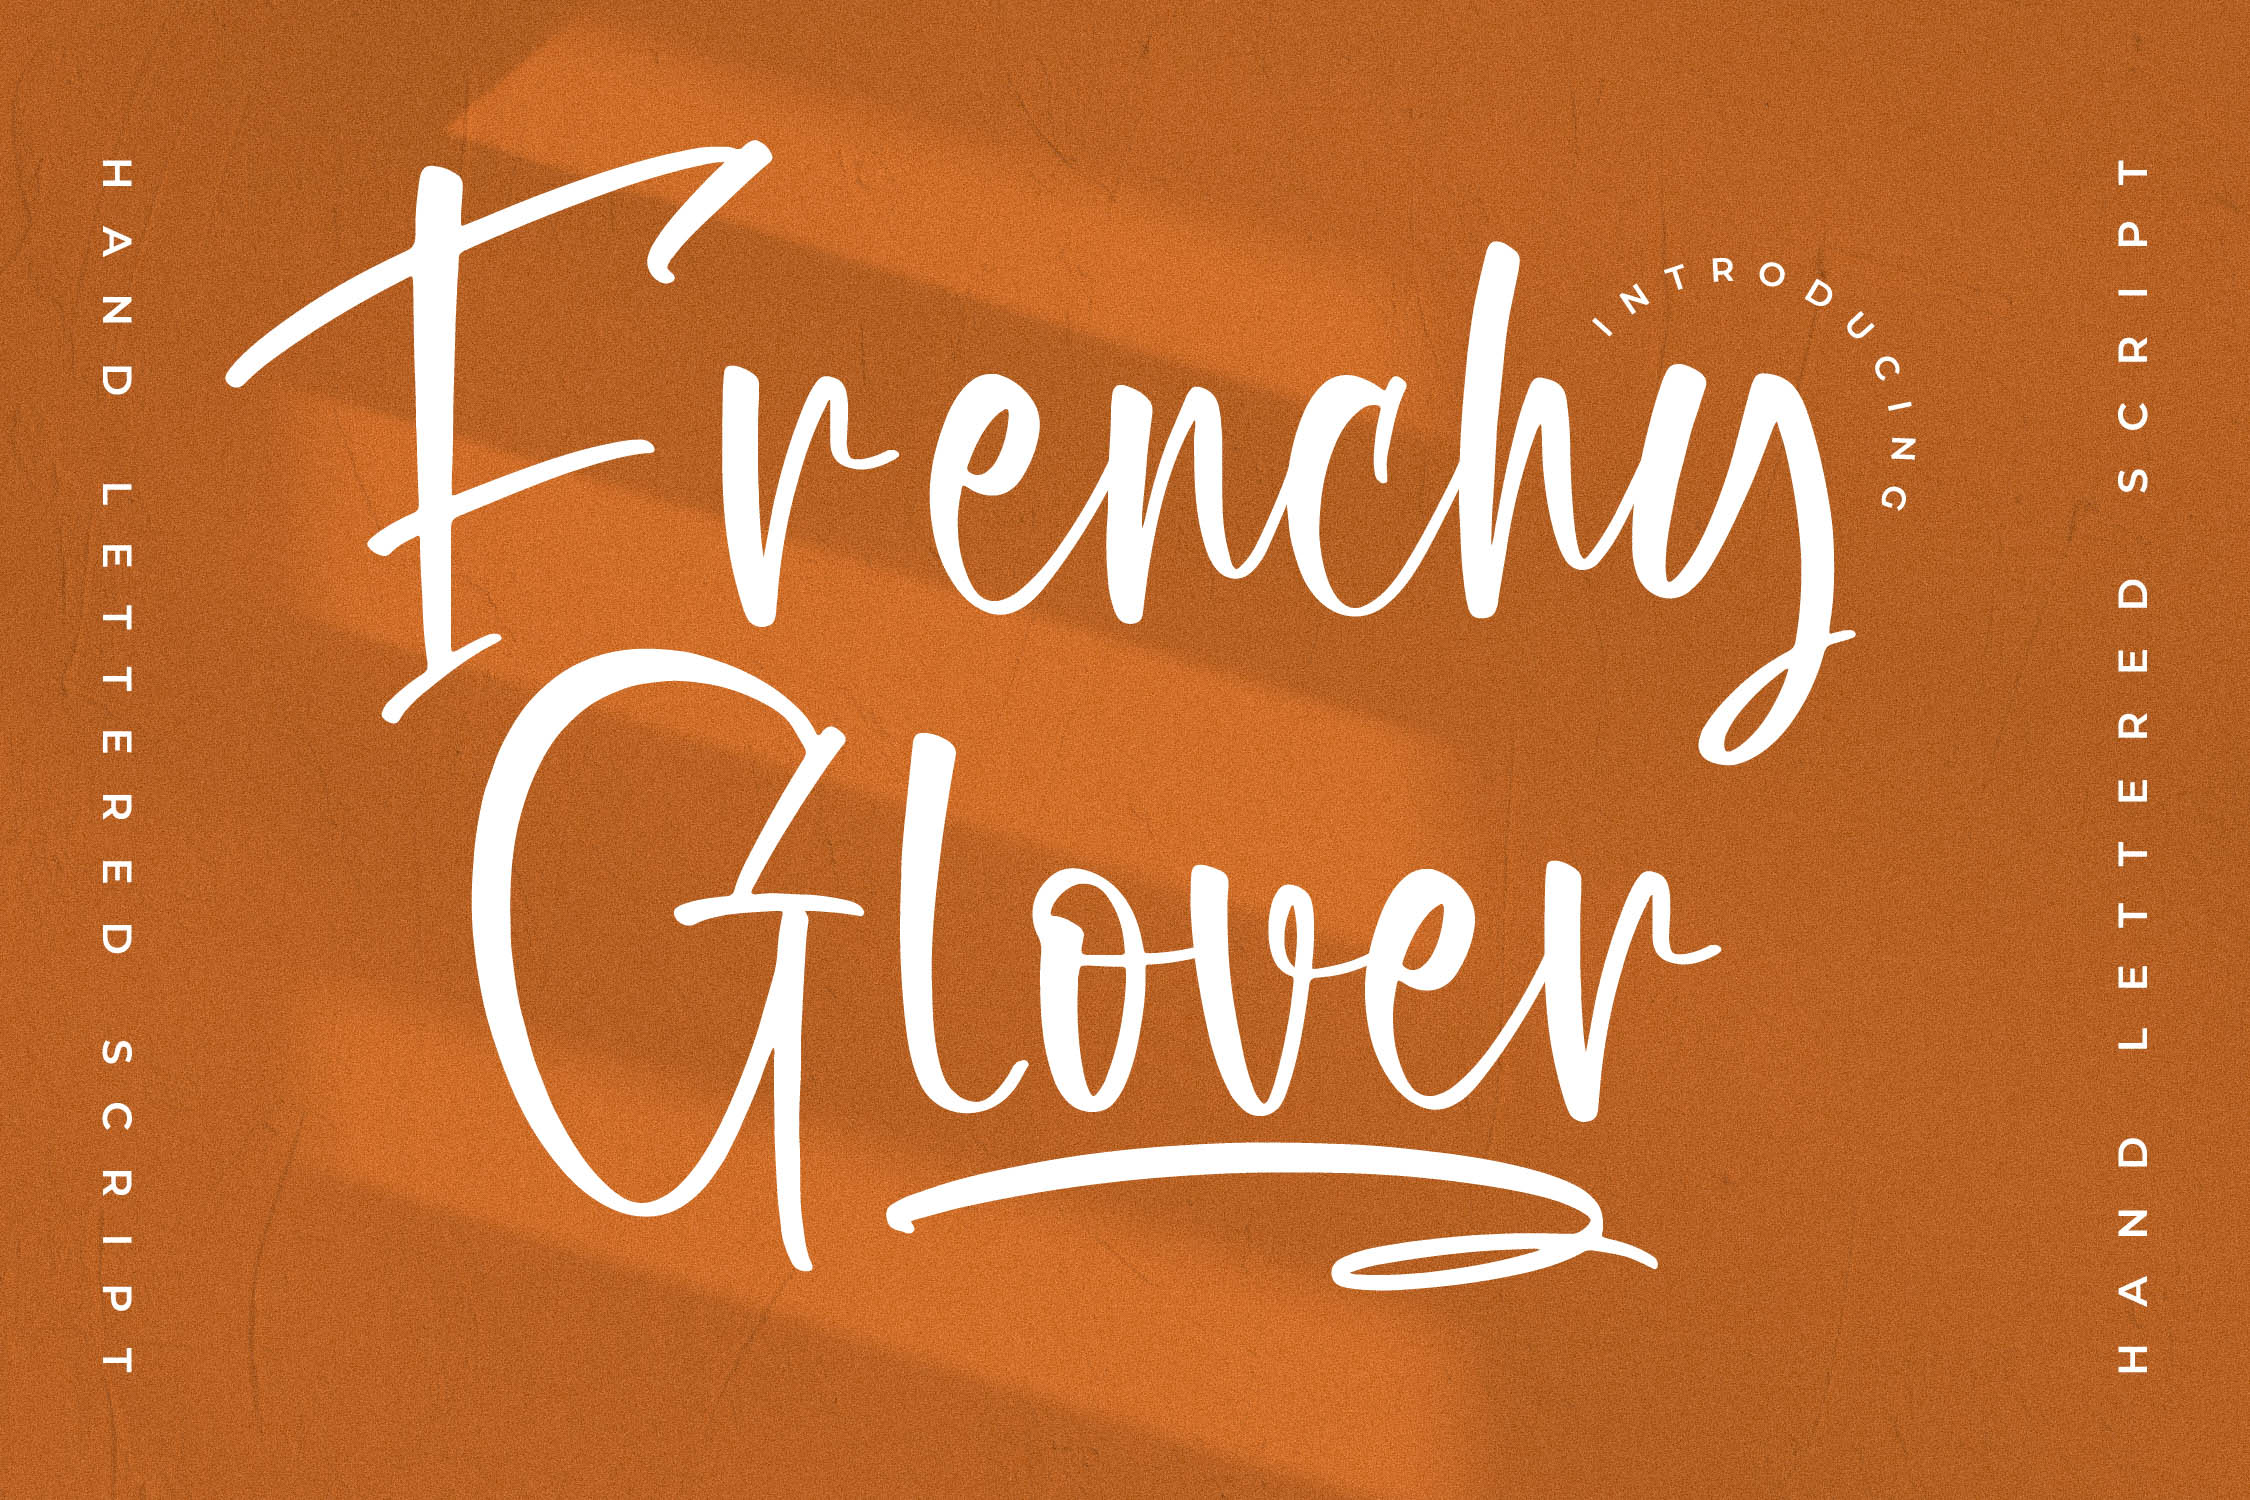 Frenchy Glover